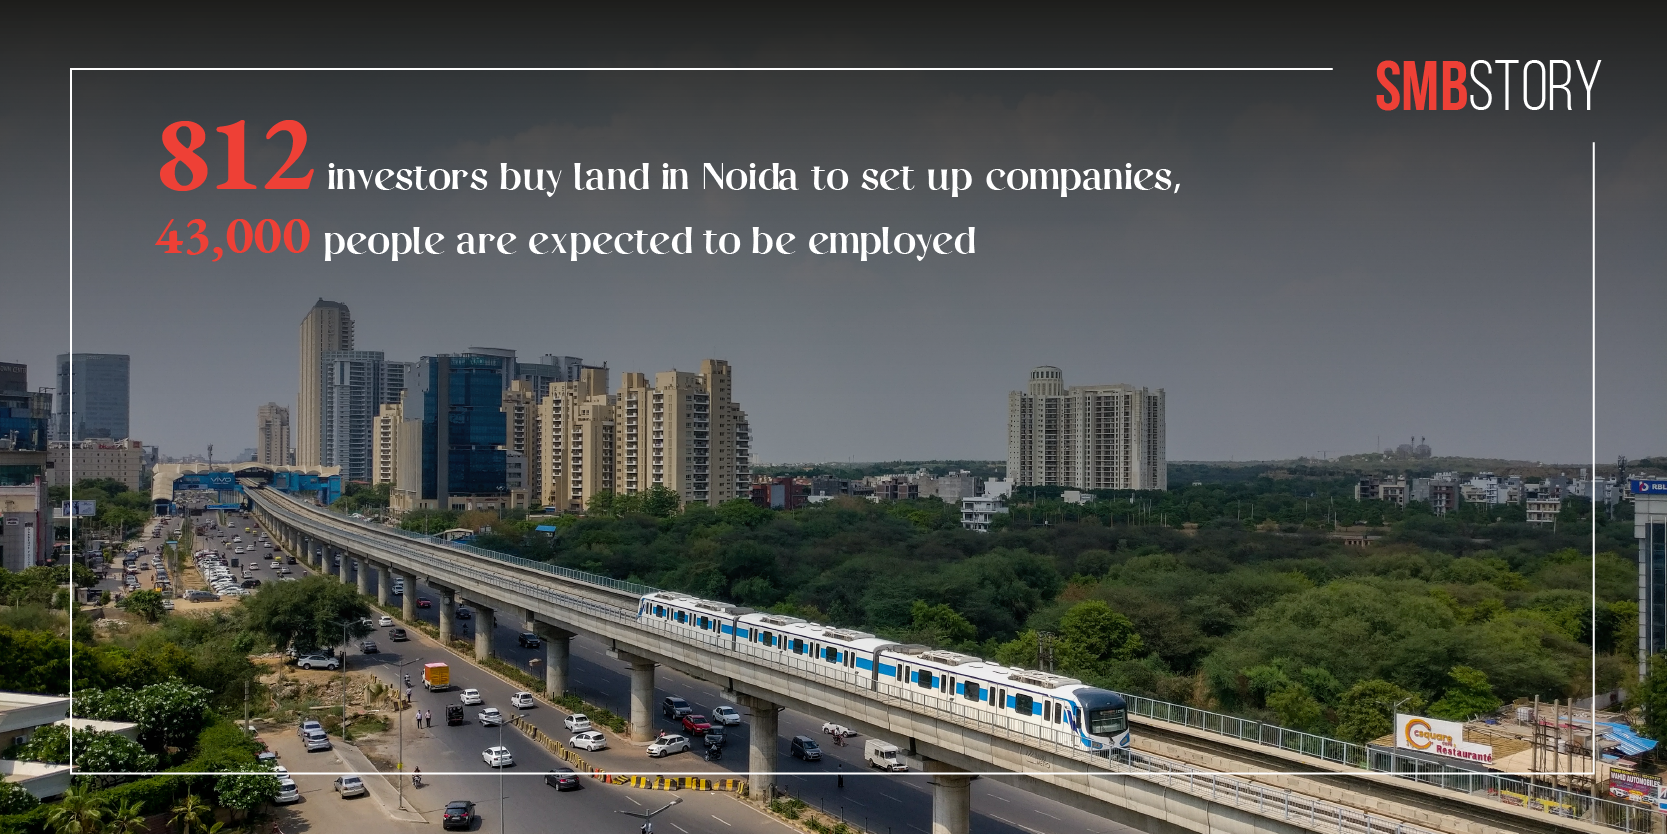 812 investors buy land in Noida to set up companies, expected to create 43,000 jobs